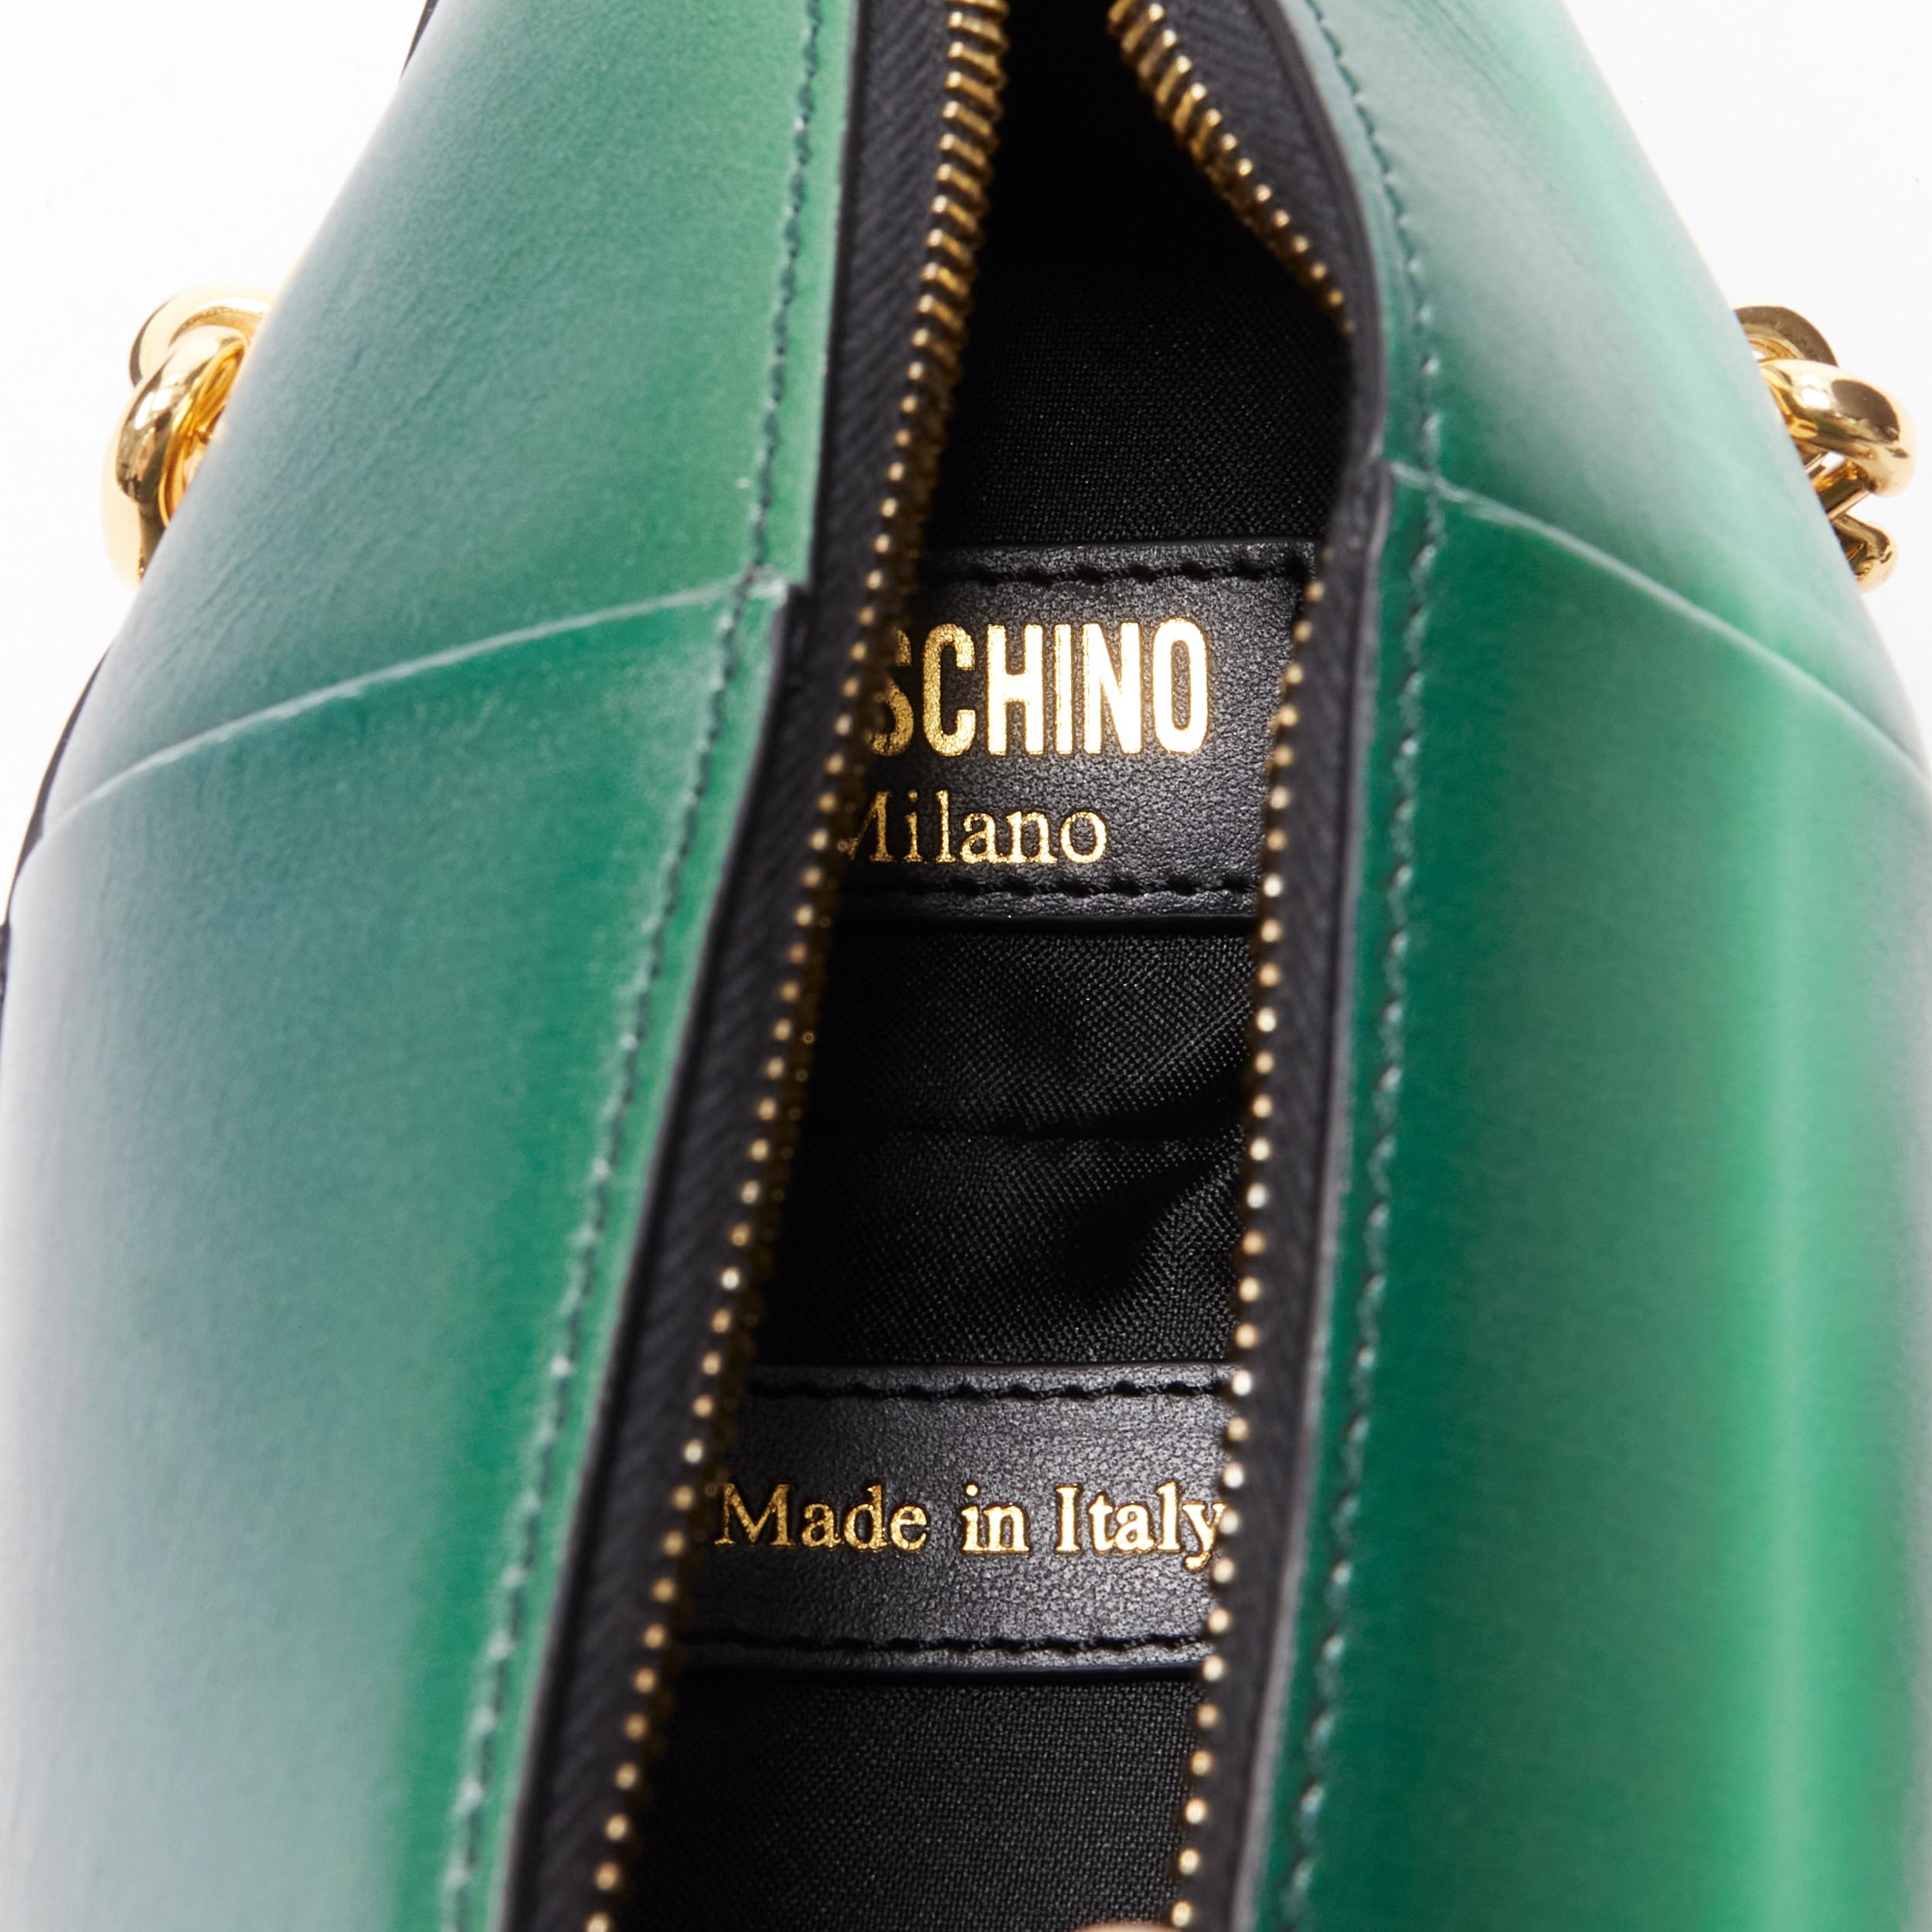 rare MOSCHINO Couture! 2019 runway green leather Champagne bottle crossbody bag 2